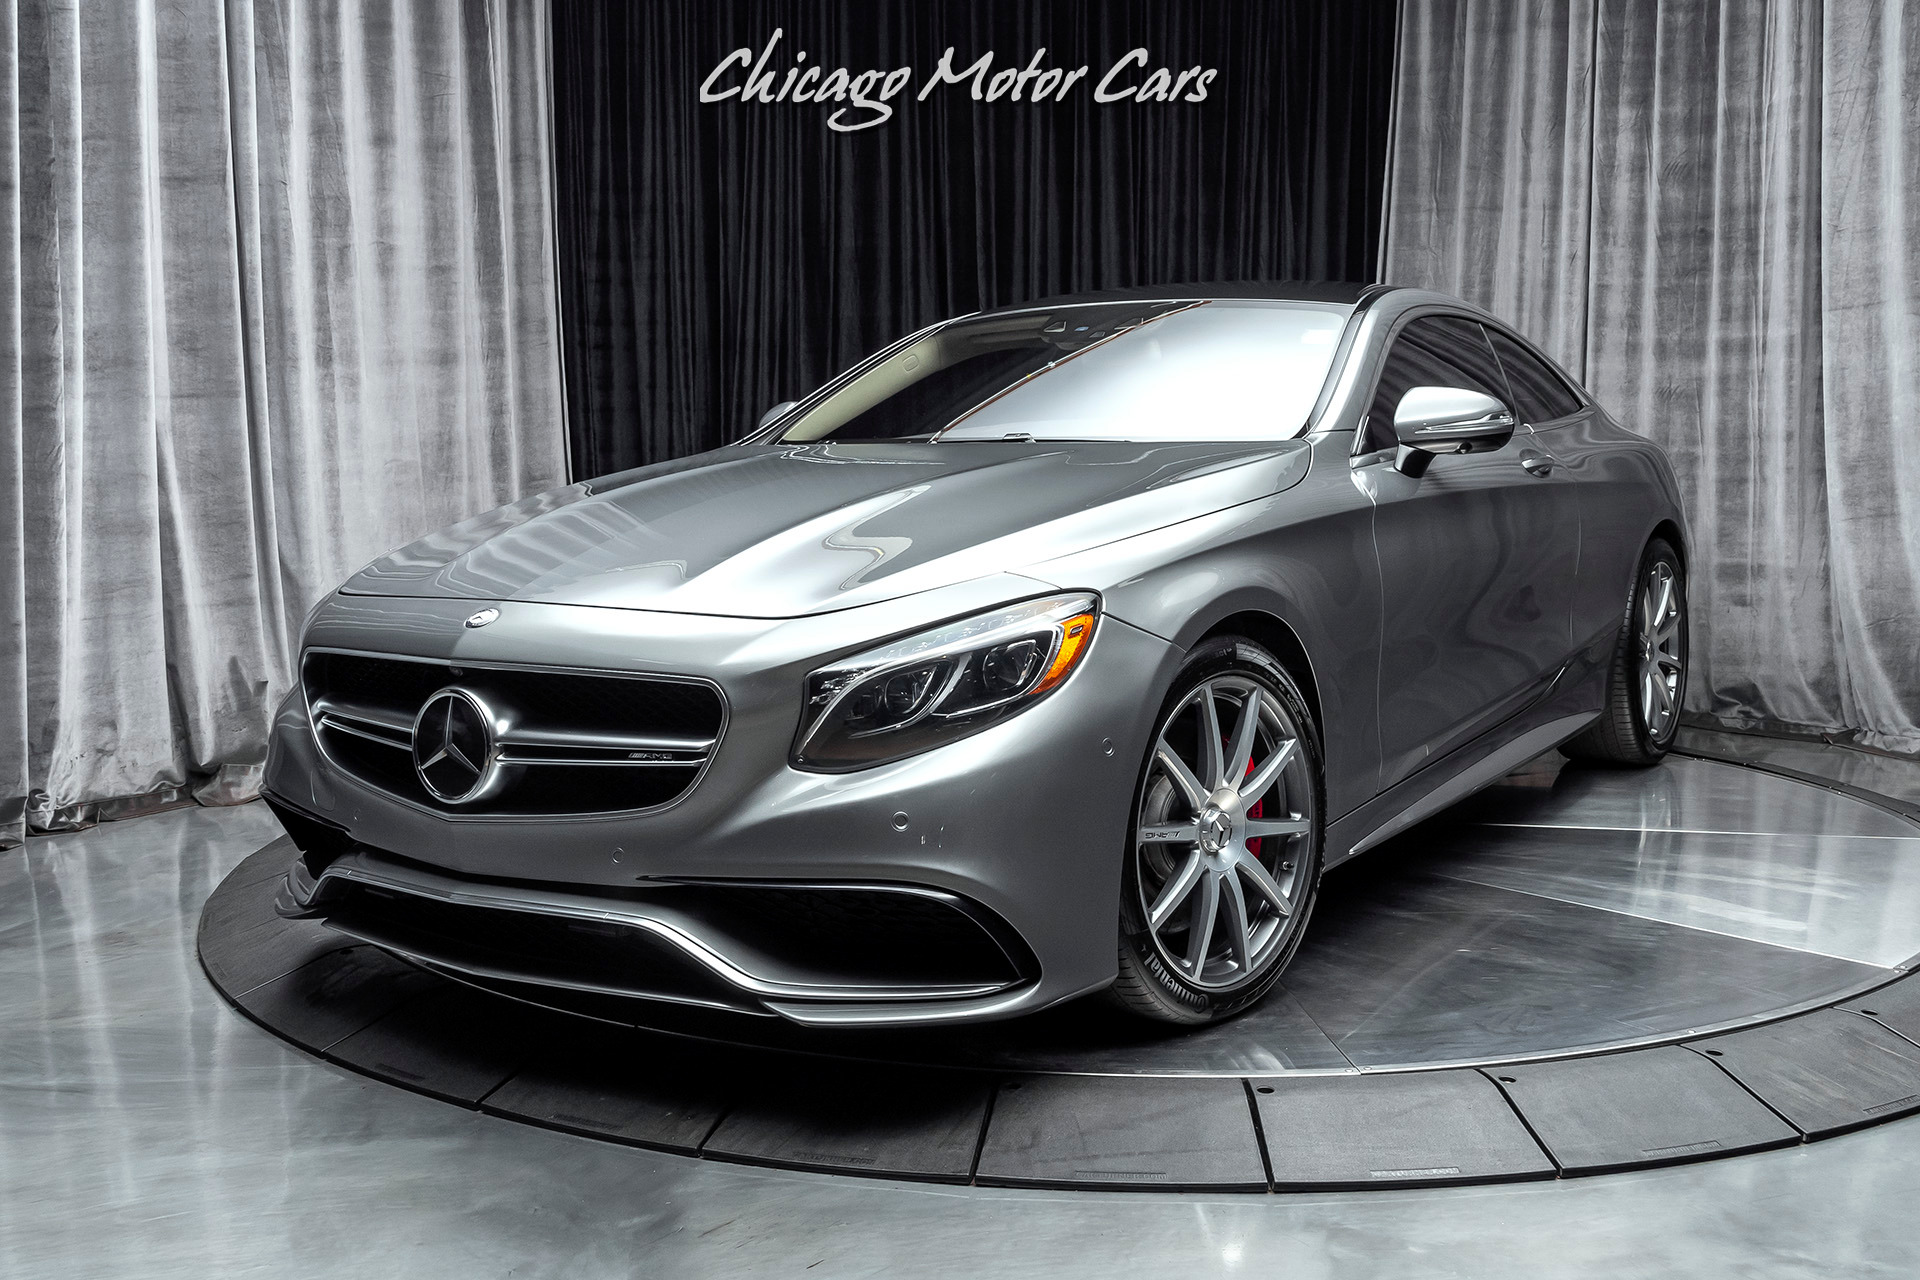 Used-2015-Mercedes-Benz-S-Class-S63-AMG-185kMSRP-Magic-Sky-Control-25k-in-Options